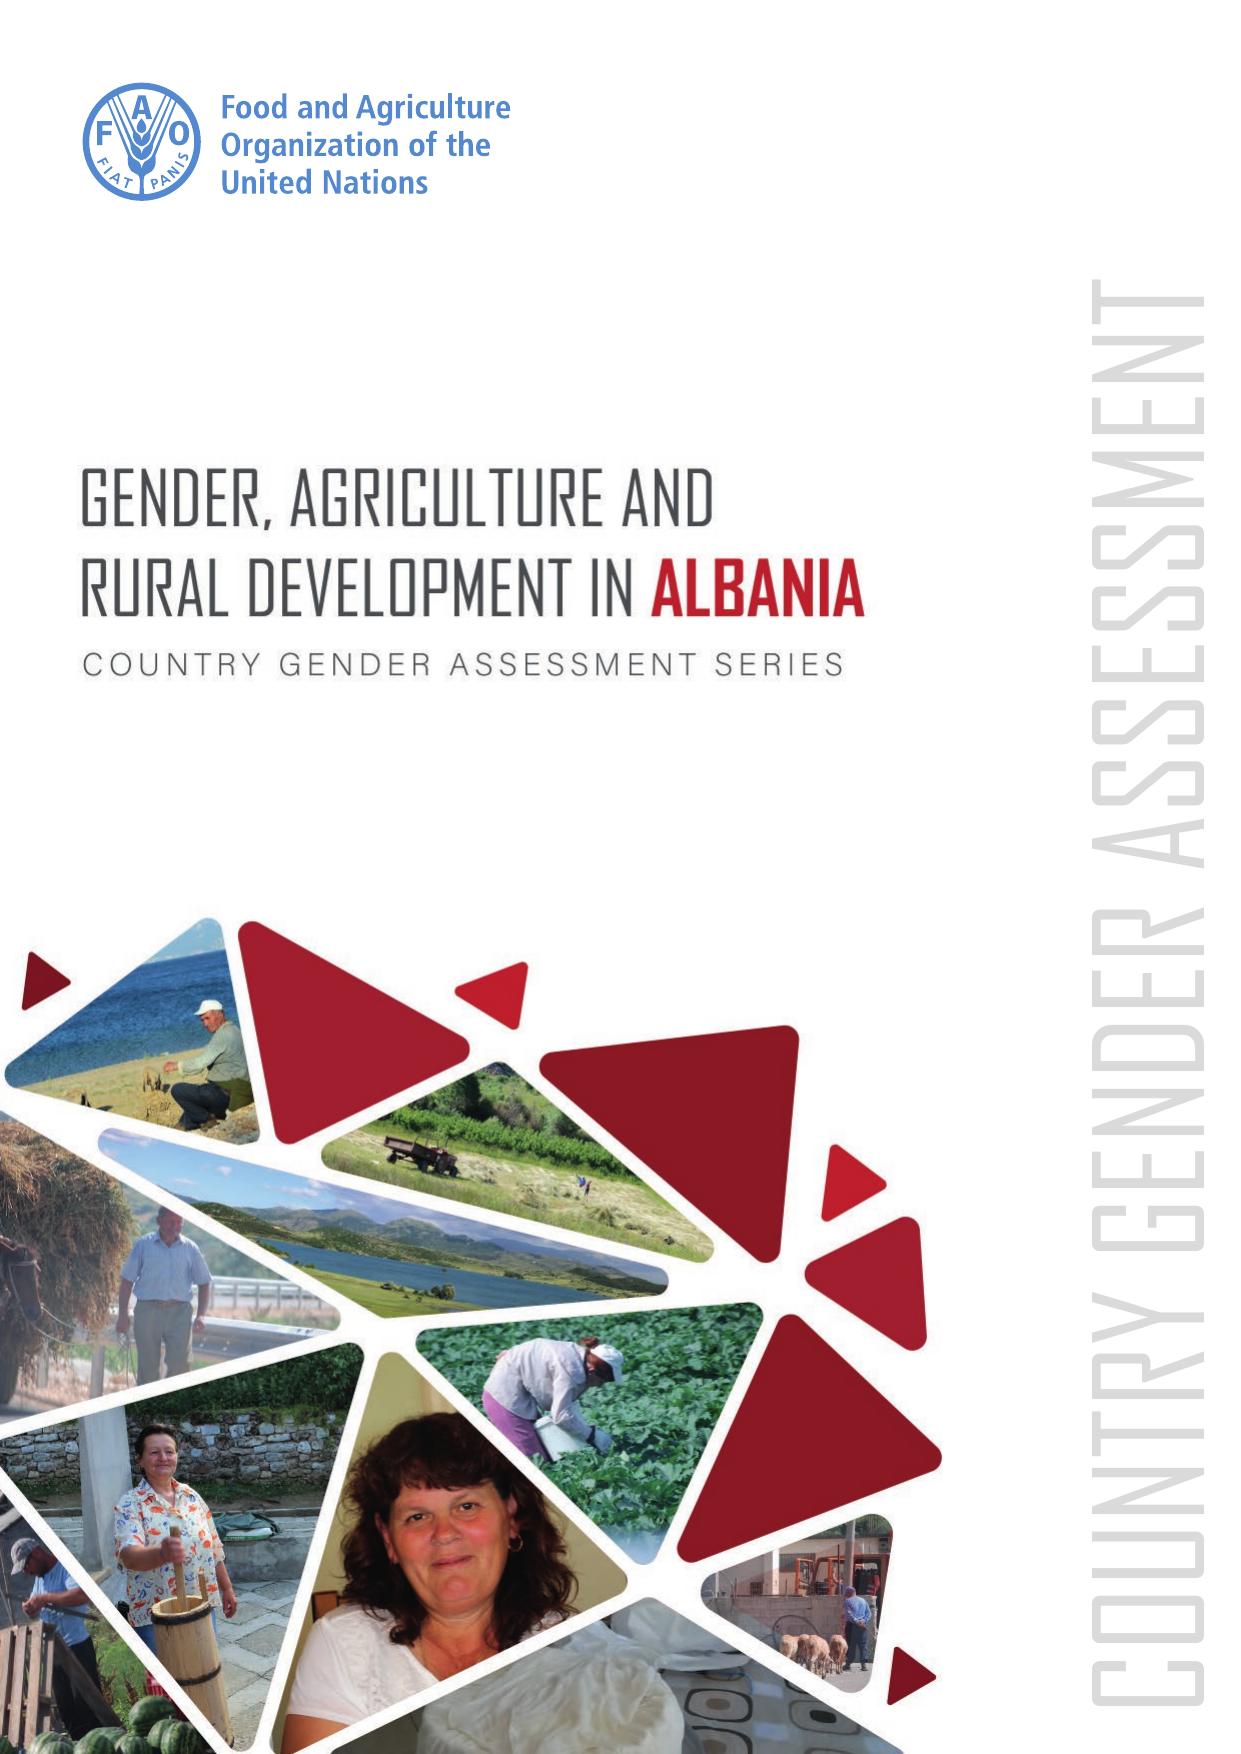 Gender, agriculture and rural development in Albania 2016